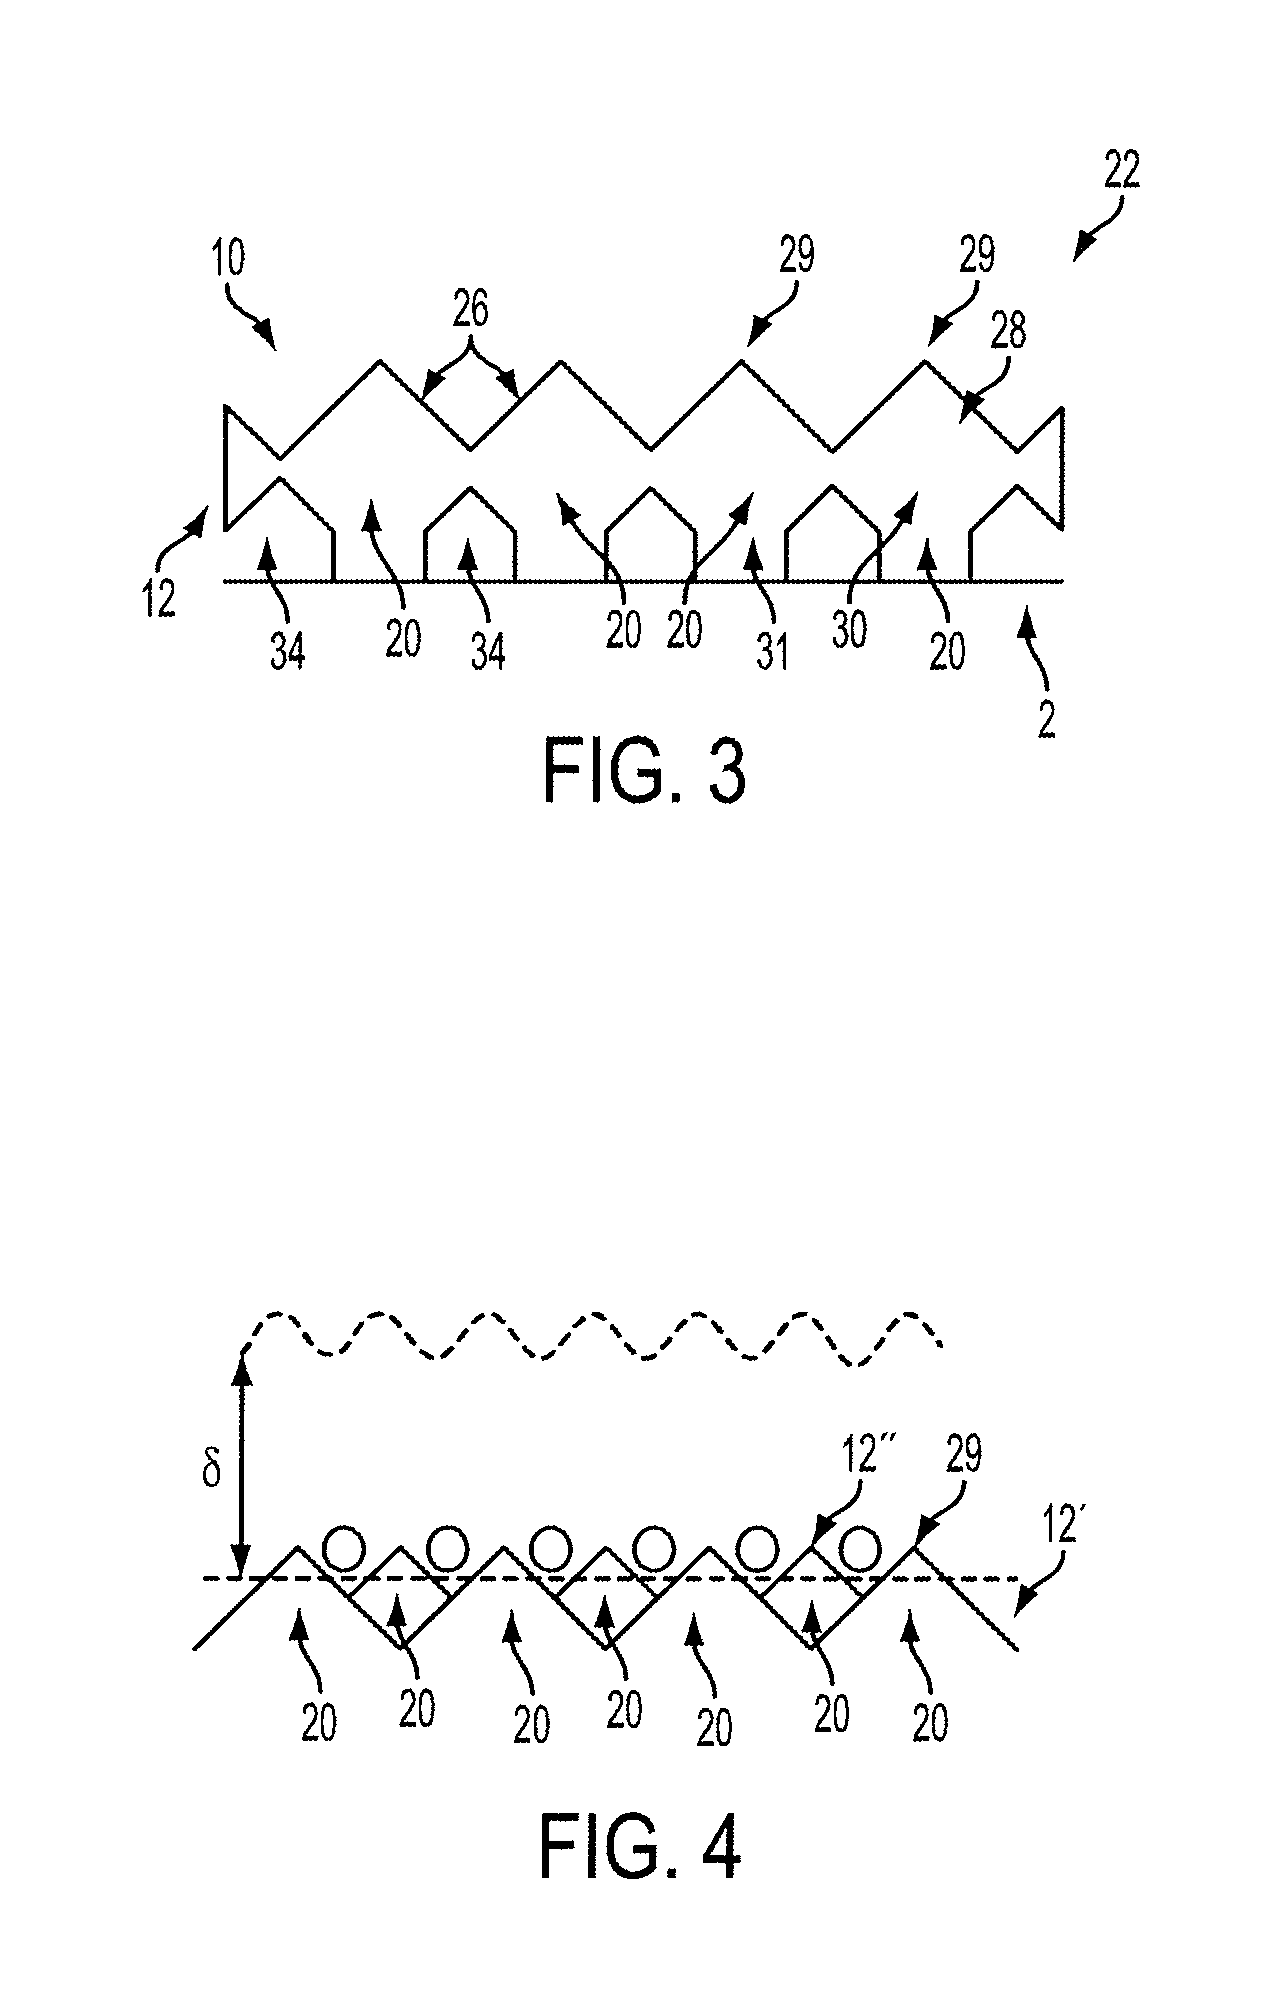 Passive micro-roughness array for drag modification